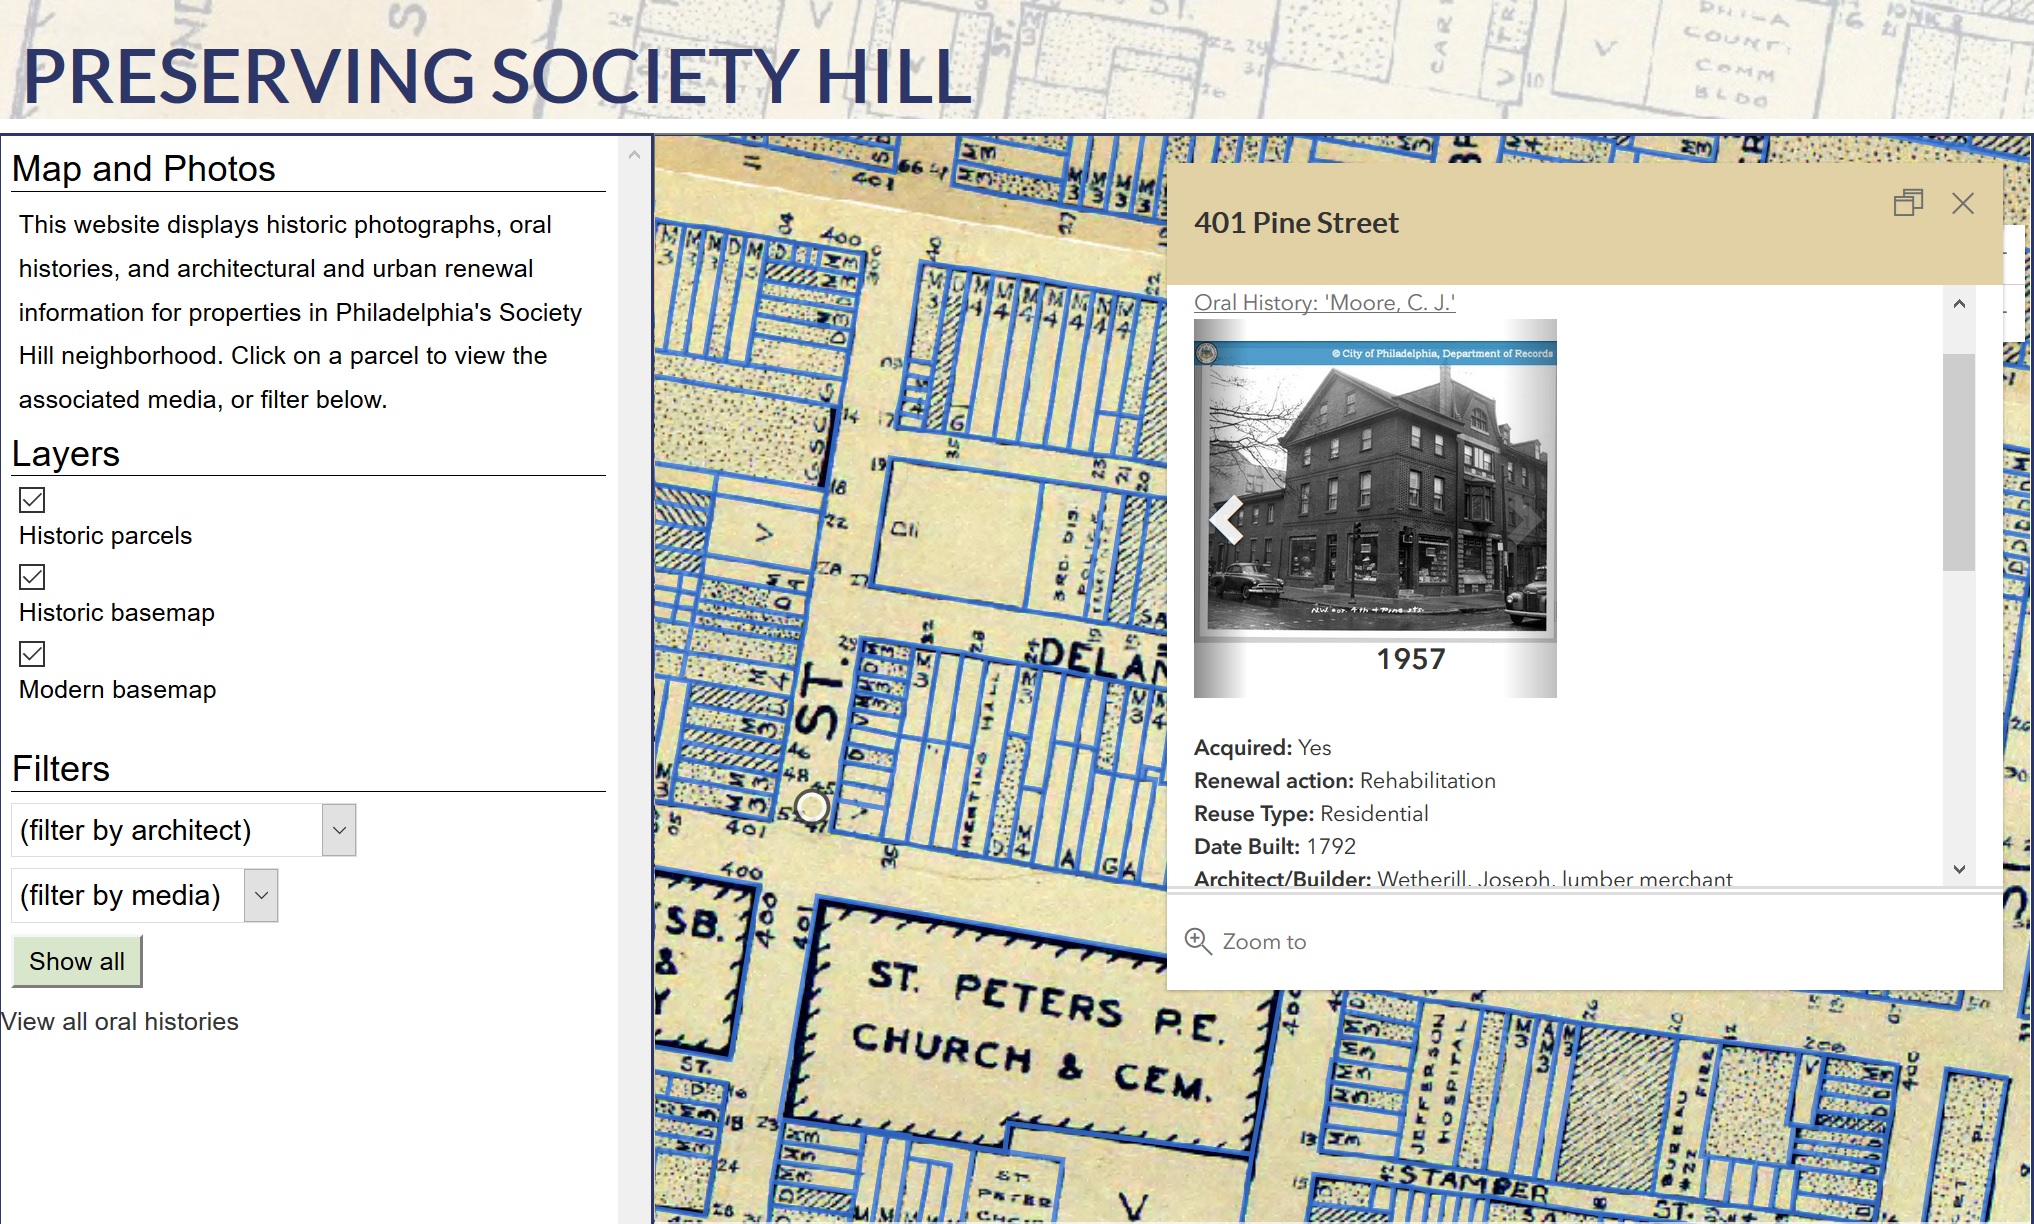 Penn School of Design Preserving Society Hill project map